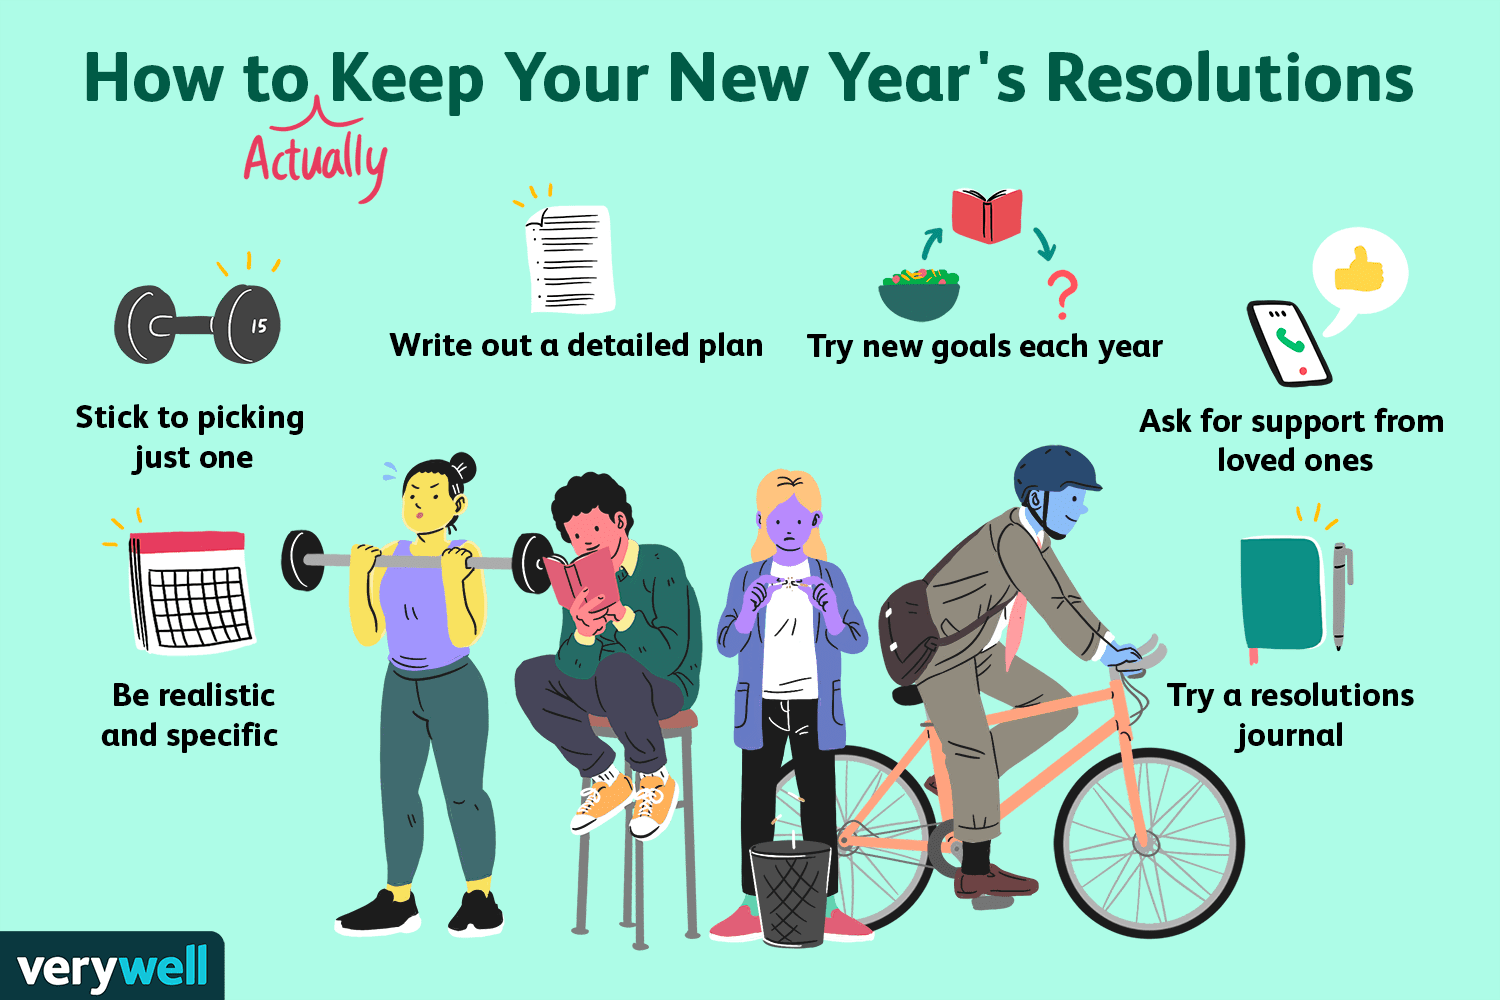 10 Great Tips for Keeping Your Resolutions This Year